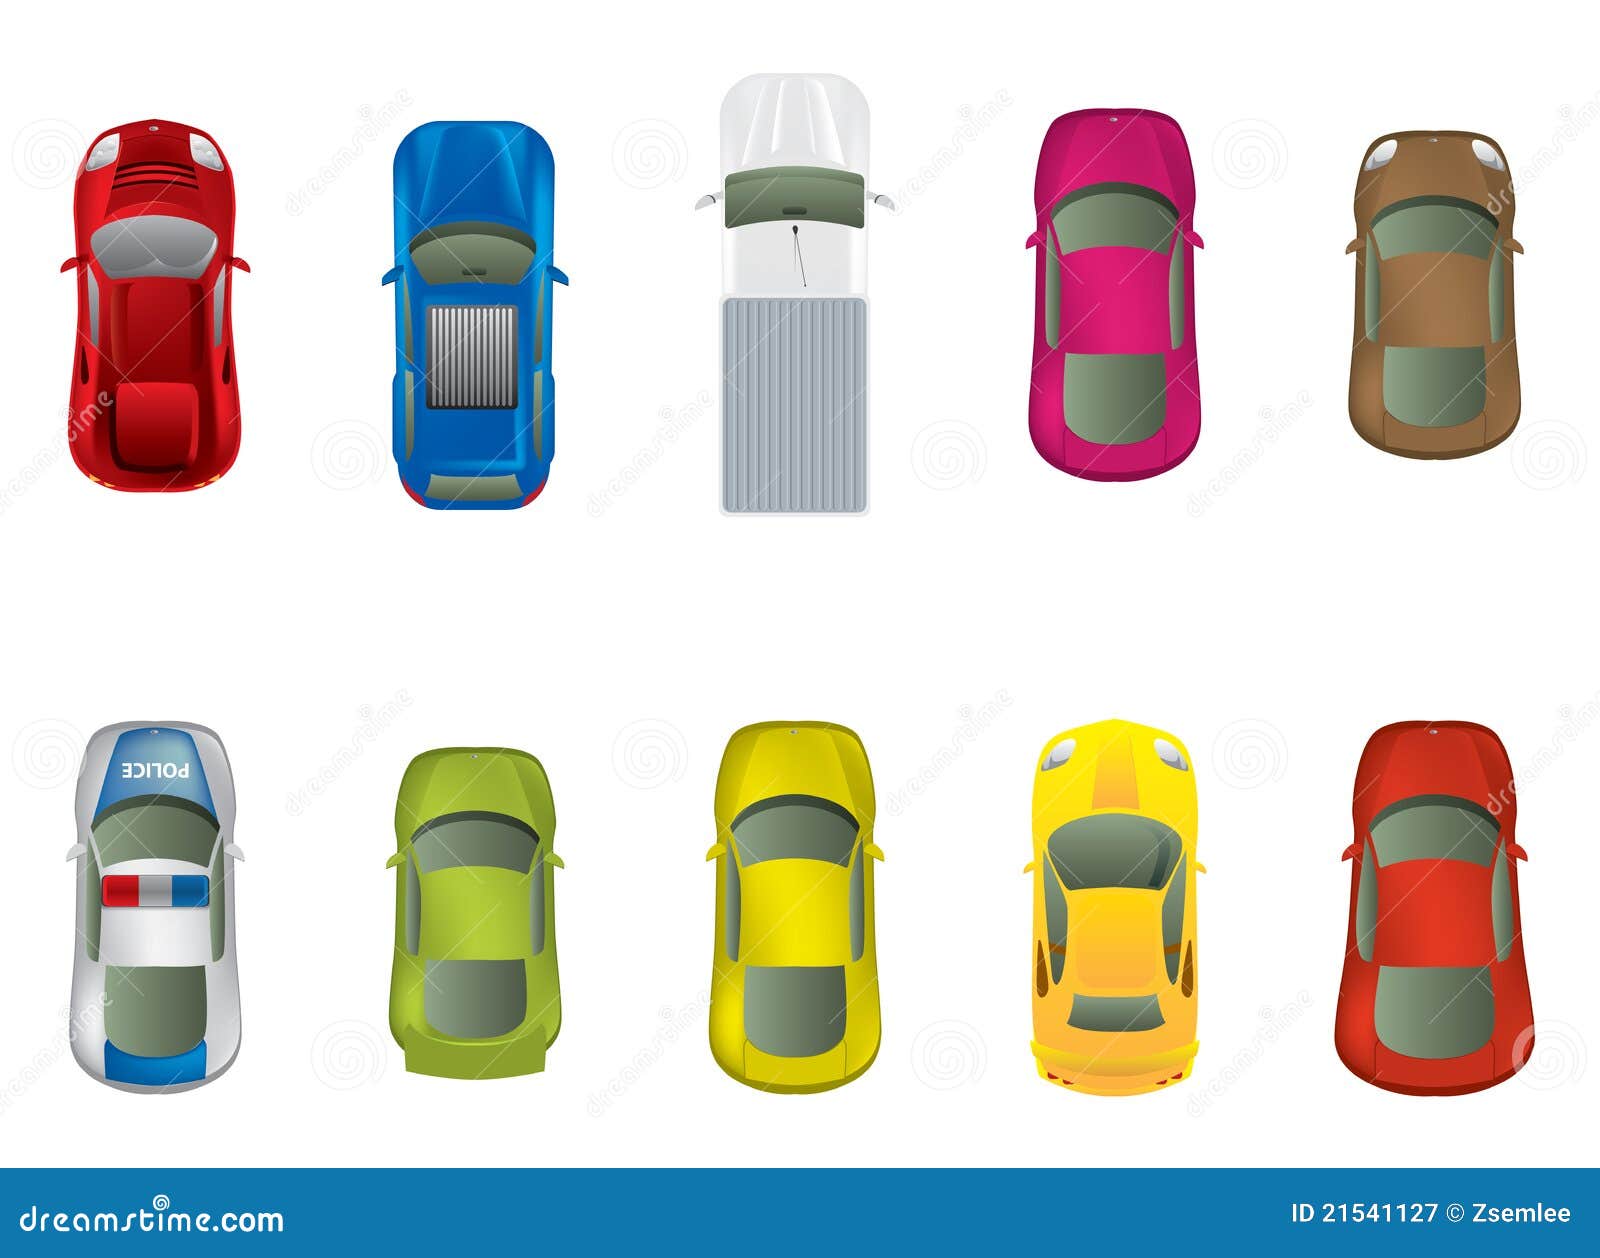 download clipart car top view - photo #36